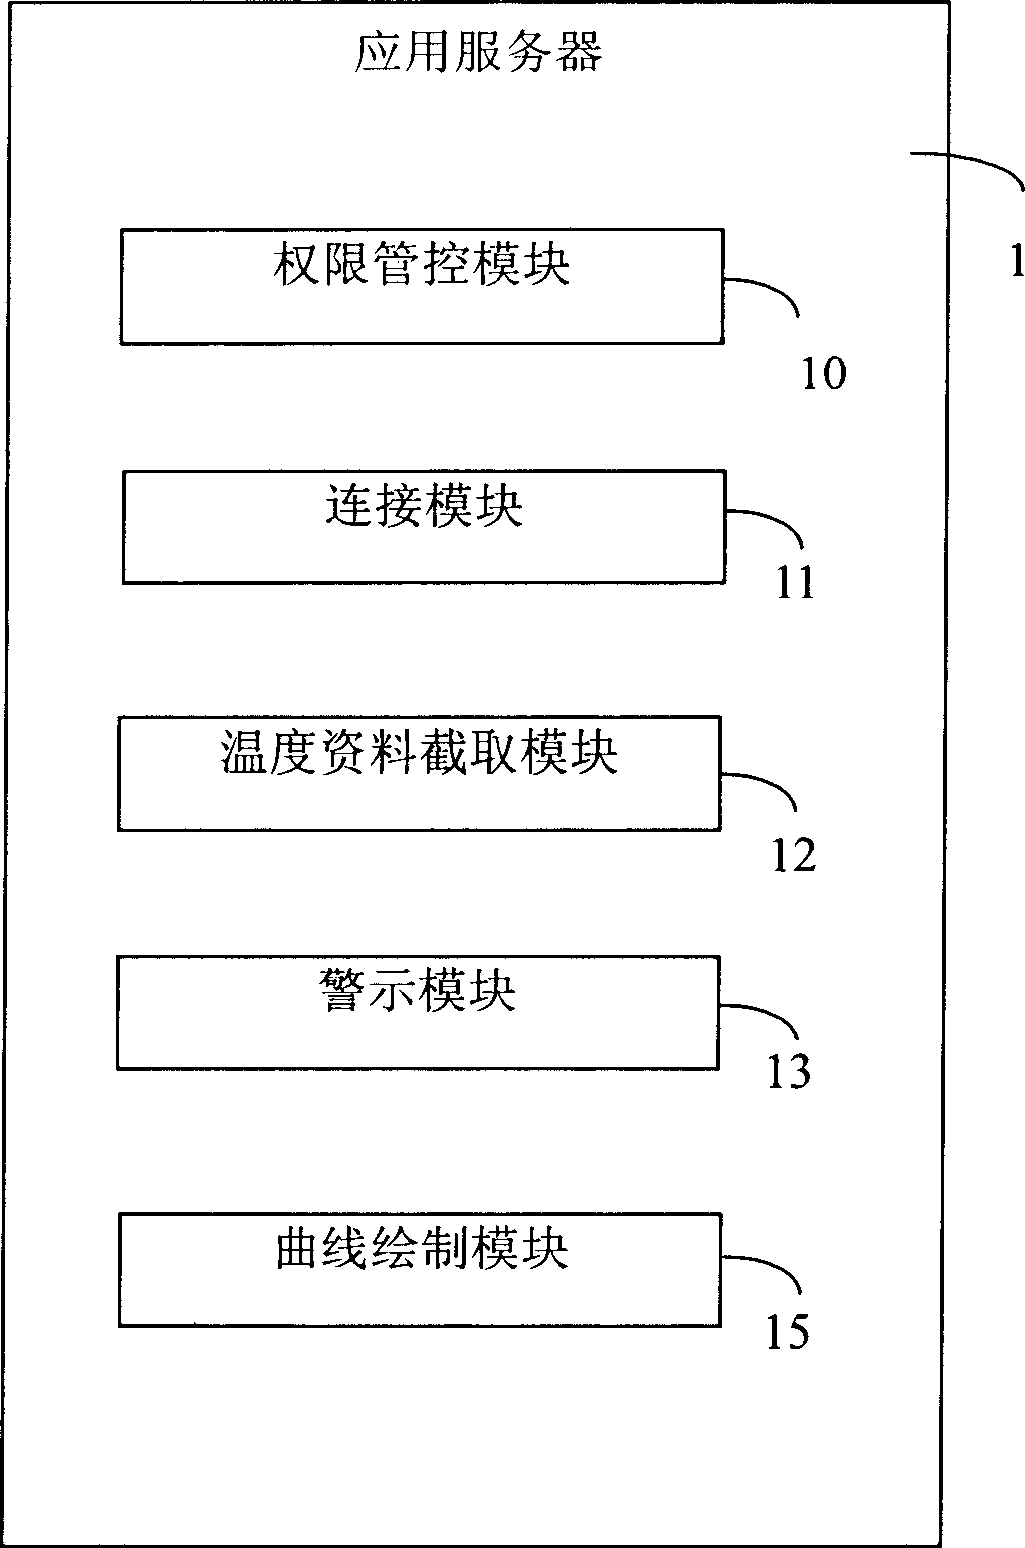 Temperature monitoring system and method